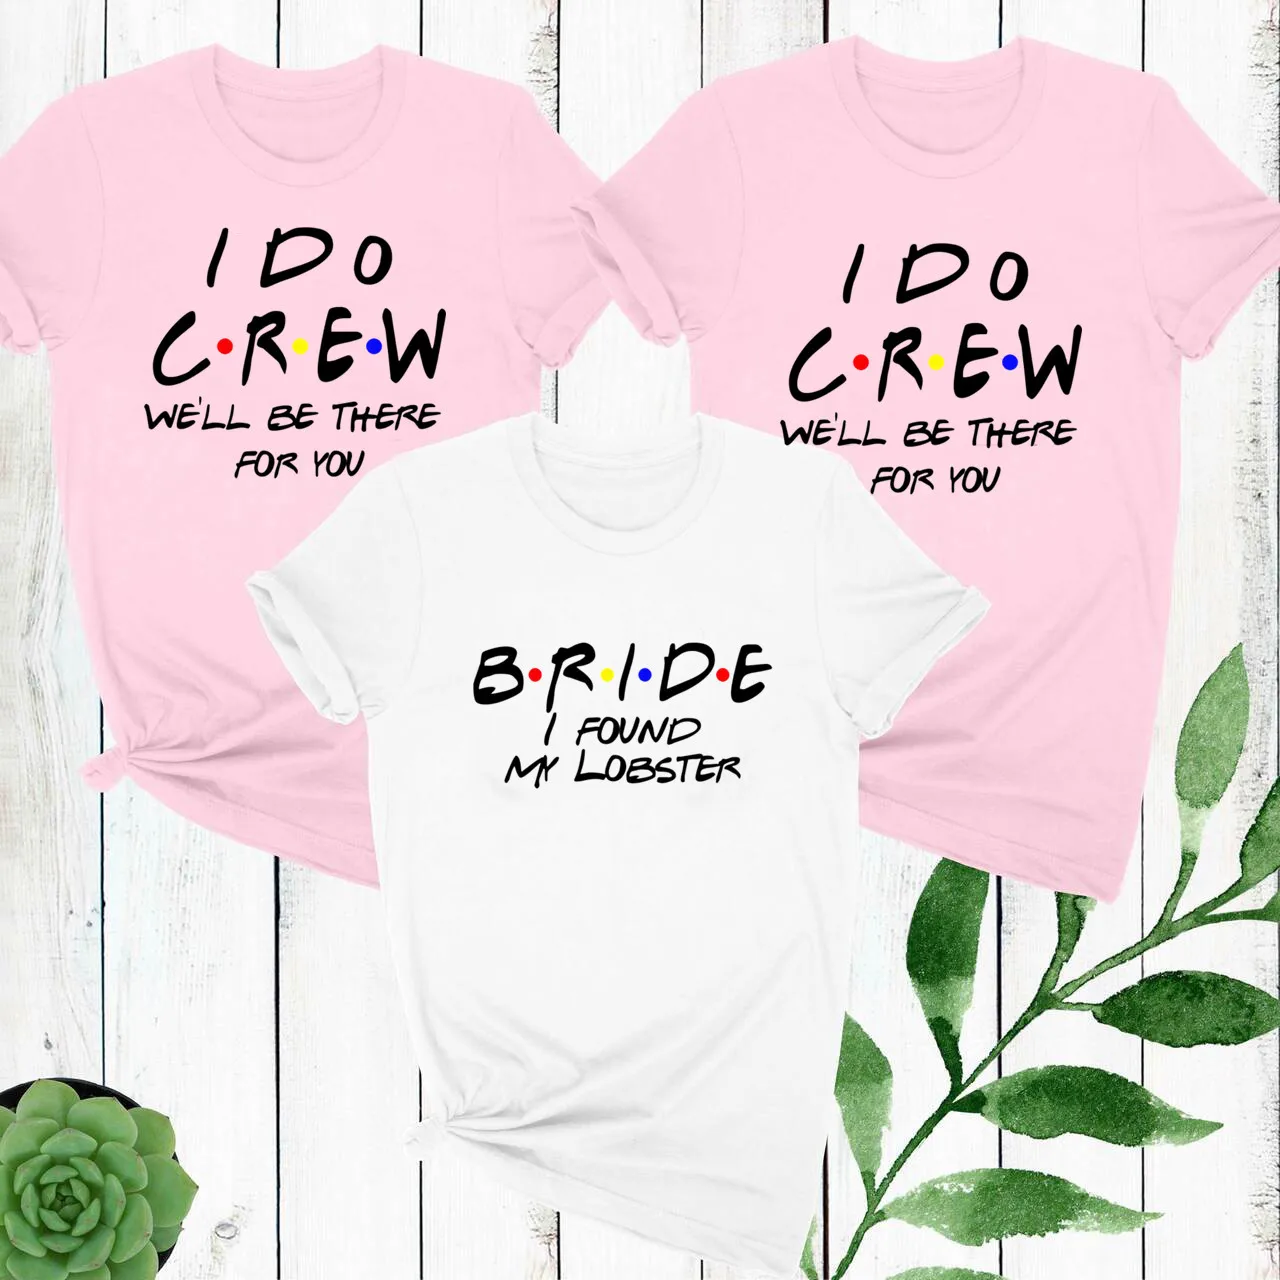 

Women I DO CREW well be there for you T-shirts 2022 EVJF Hen Party Bachelorette Girl Wedding Female Tops Tees